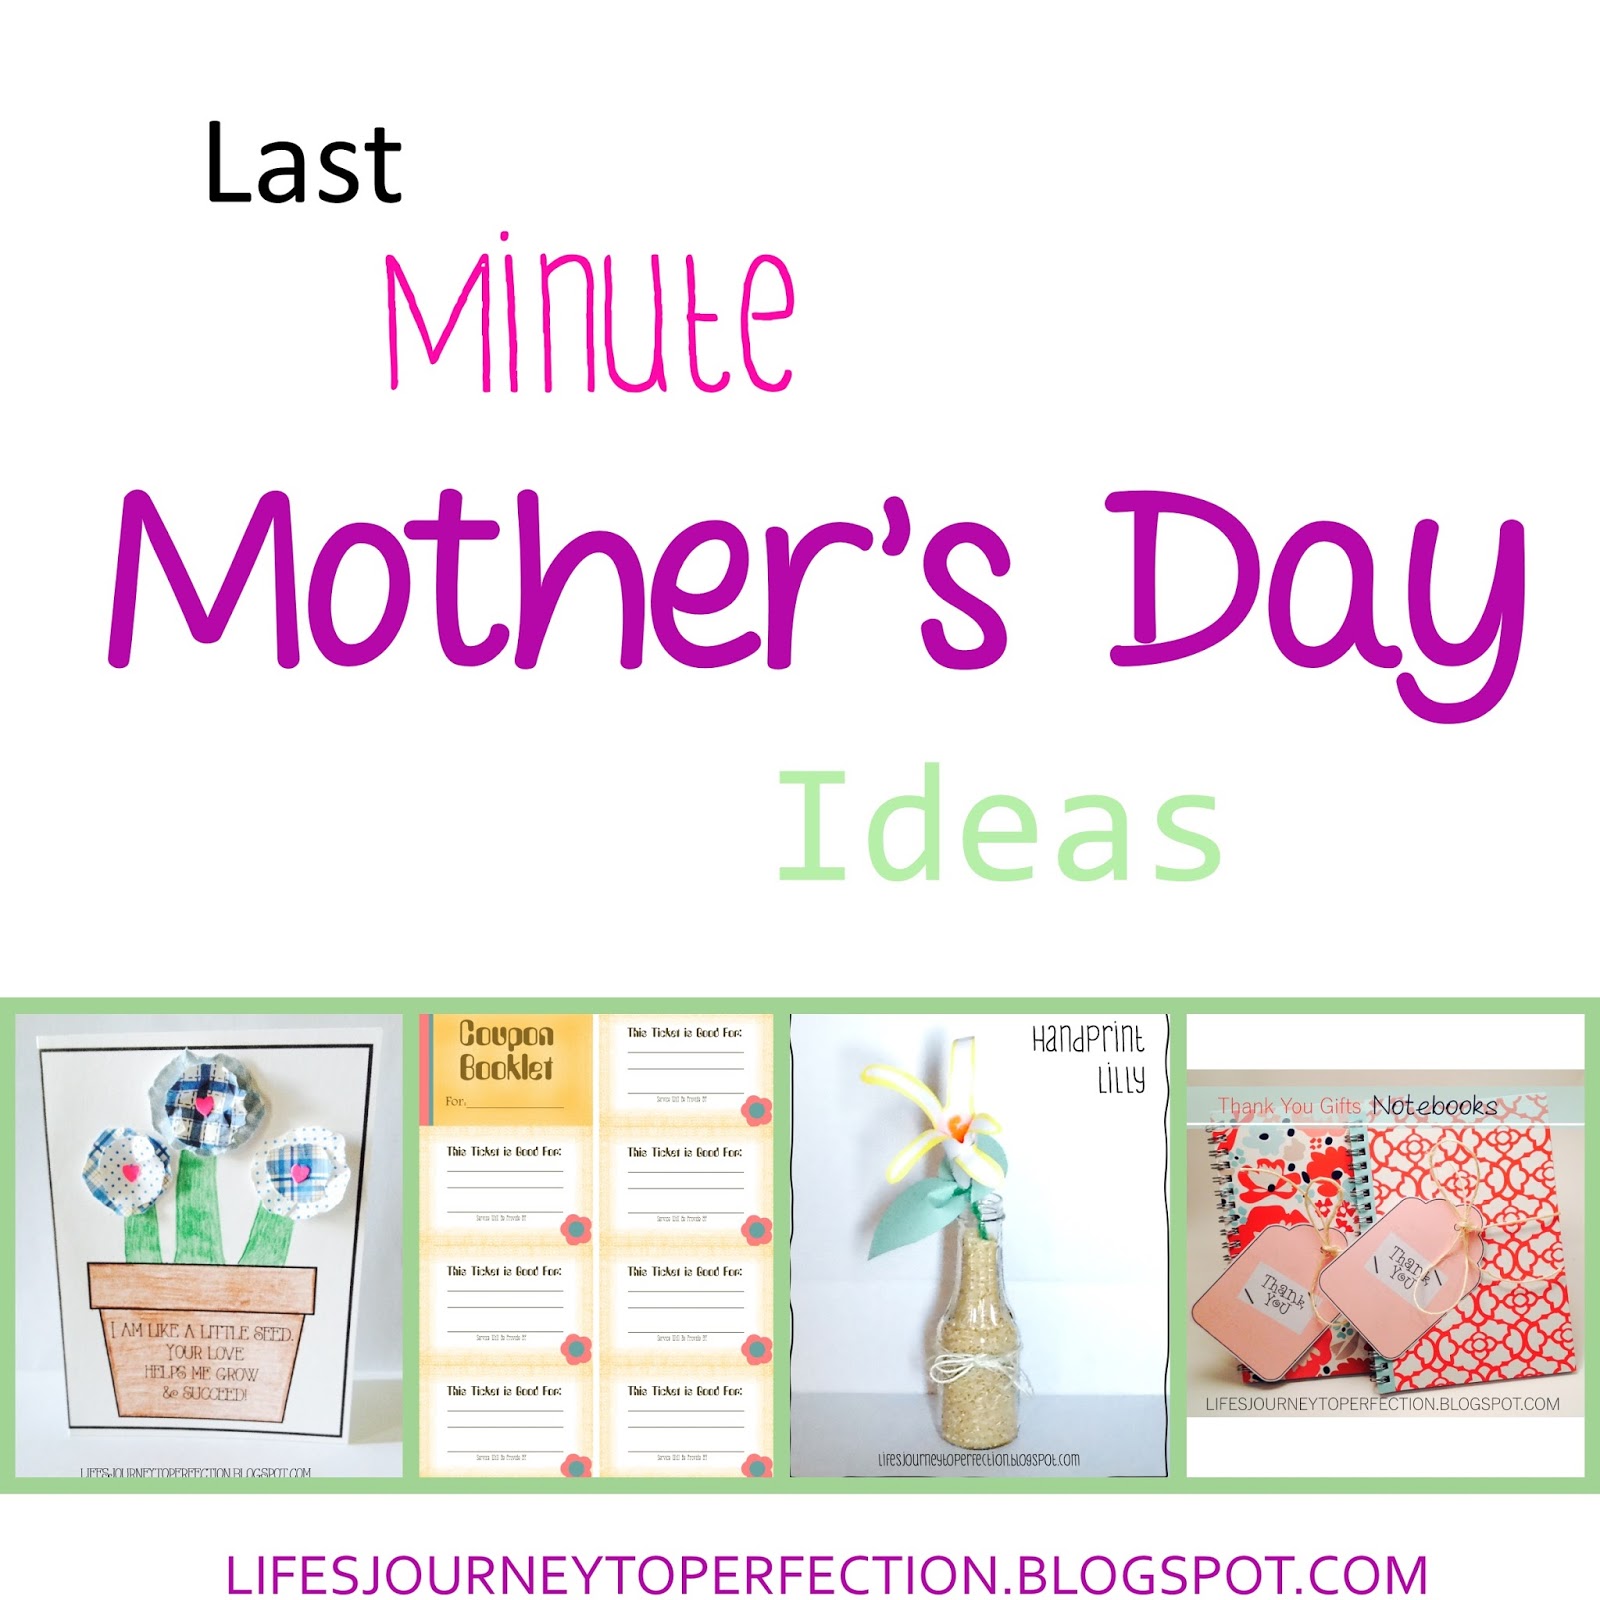 EASY Last Minute DIY Mother's Day Gifts 2018! Cheap & Cute Gift ideas for  your mom! 